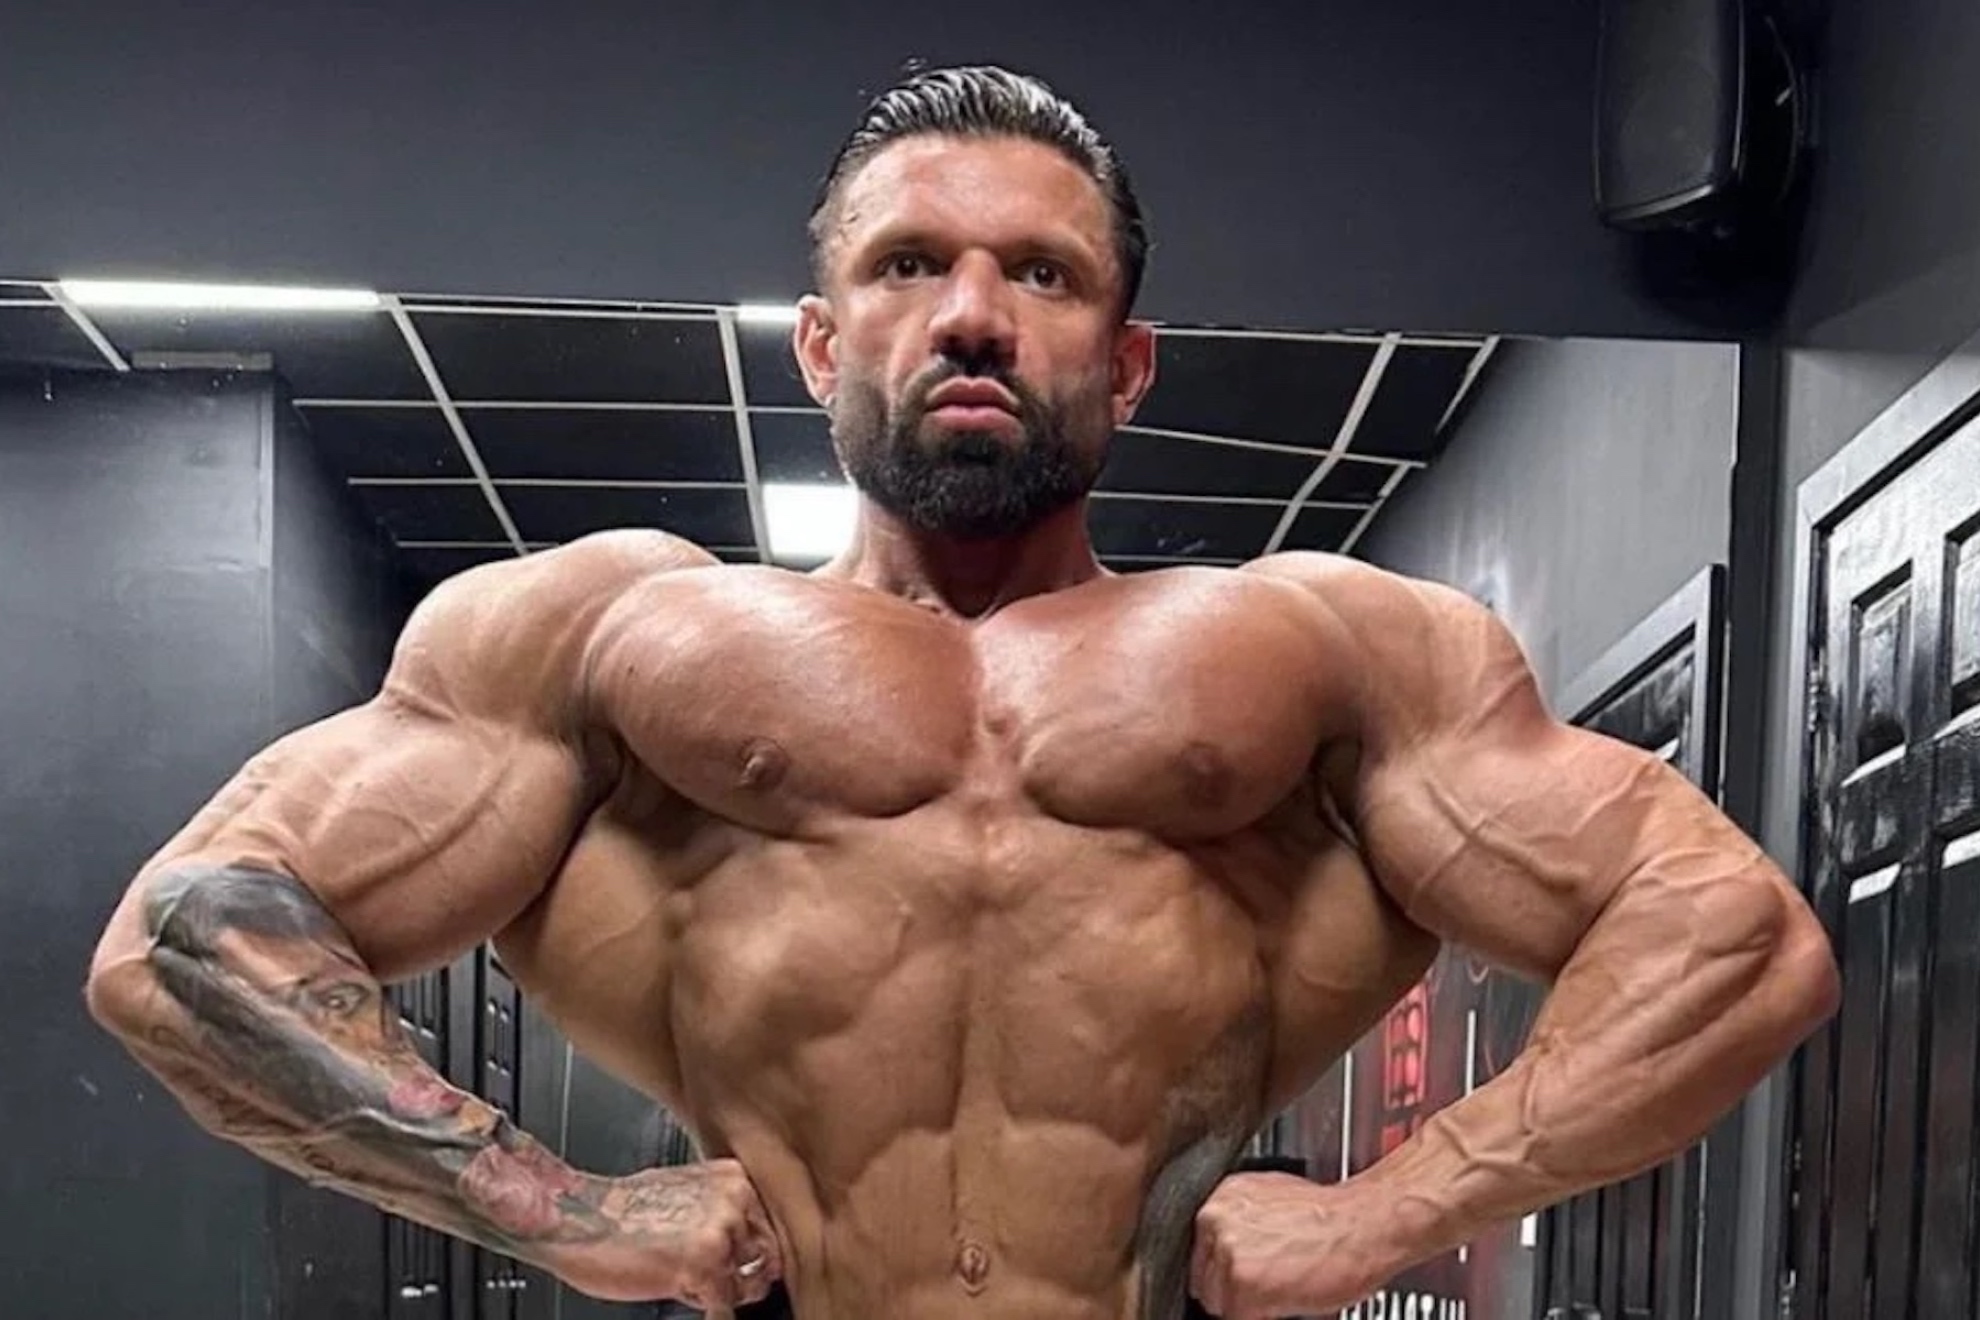 Neil Currey Cause of Death: How did the Mr Olympia bodybuilder die aged 34?